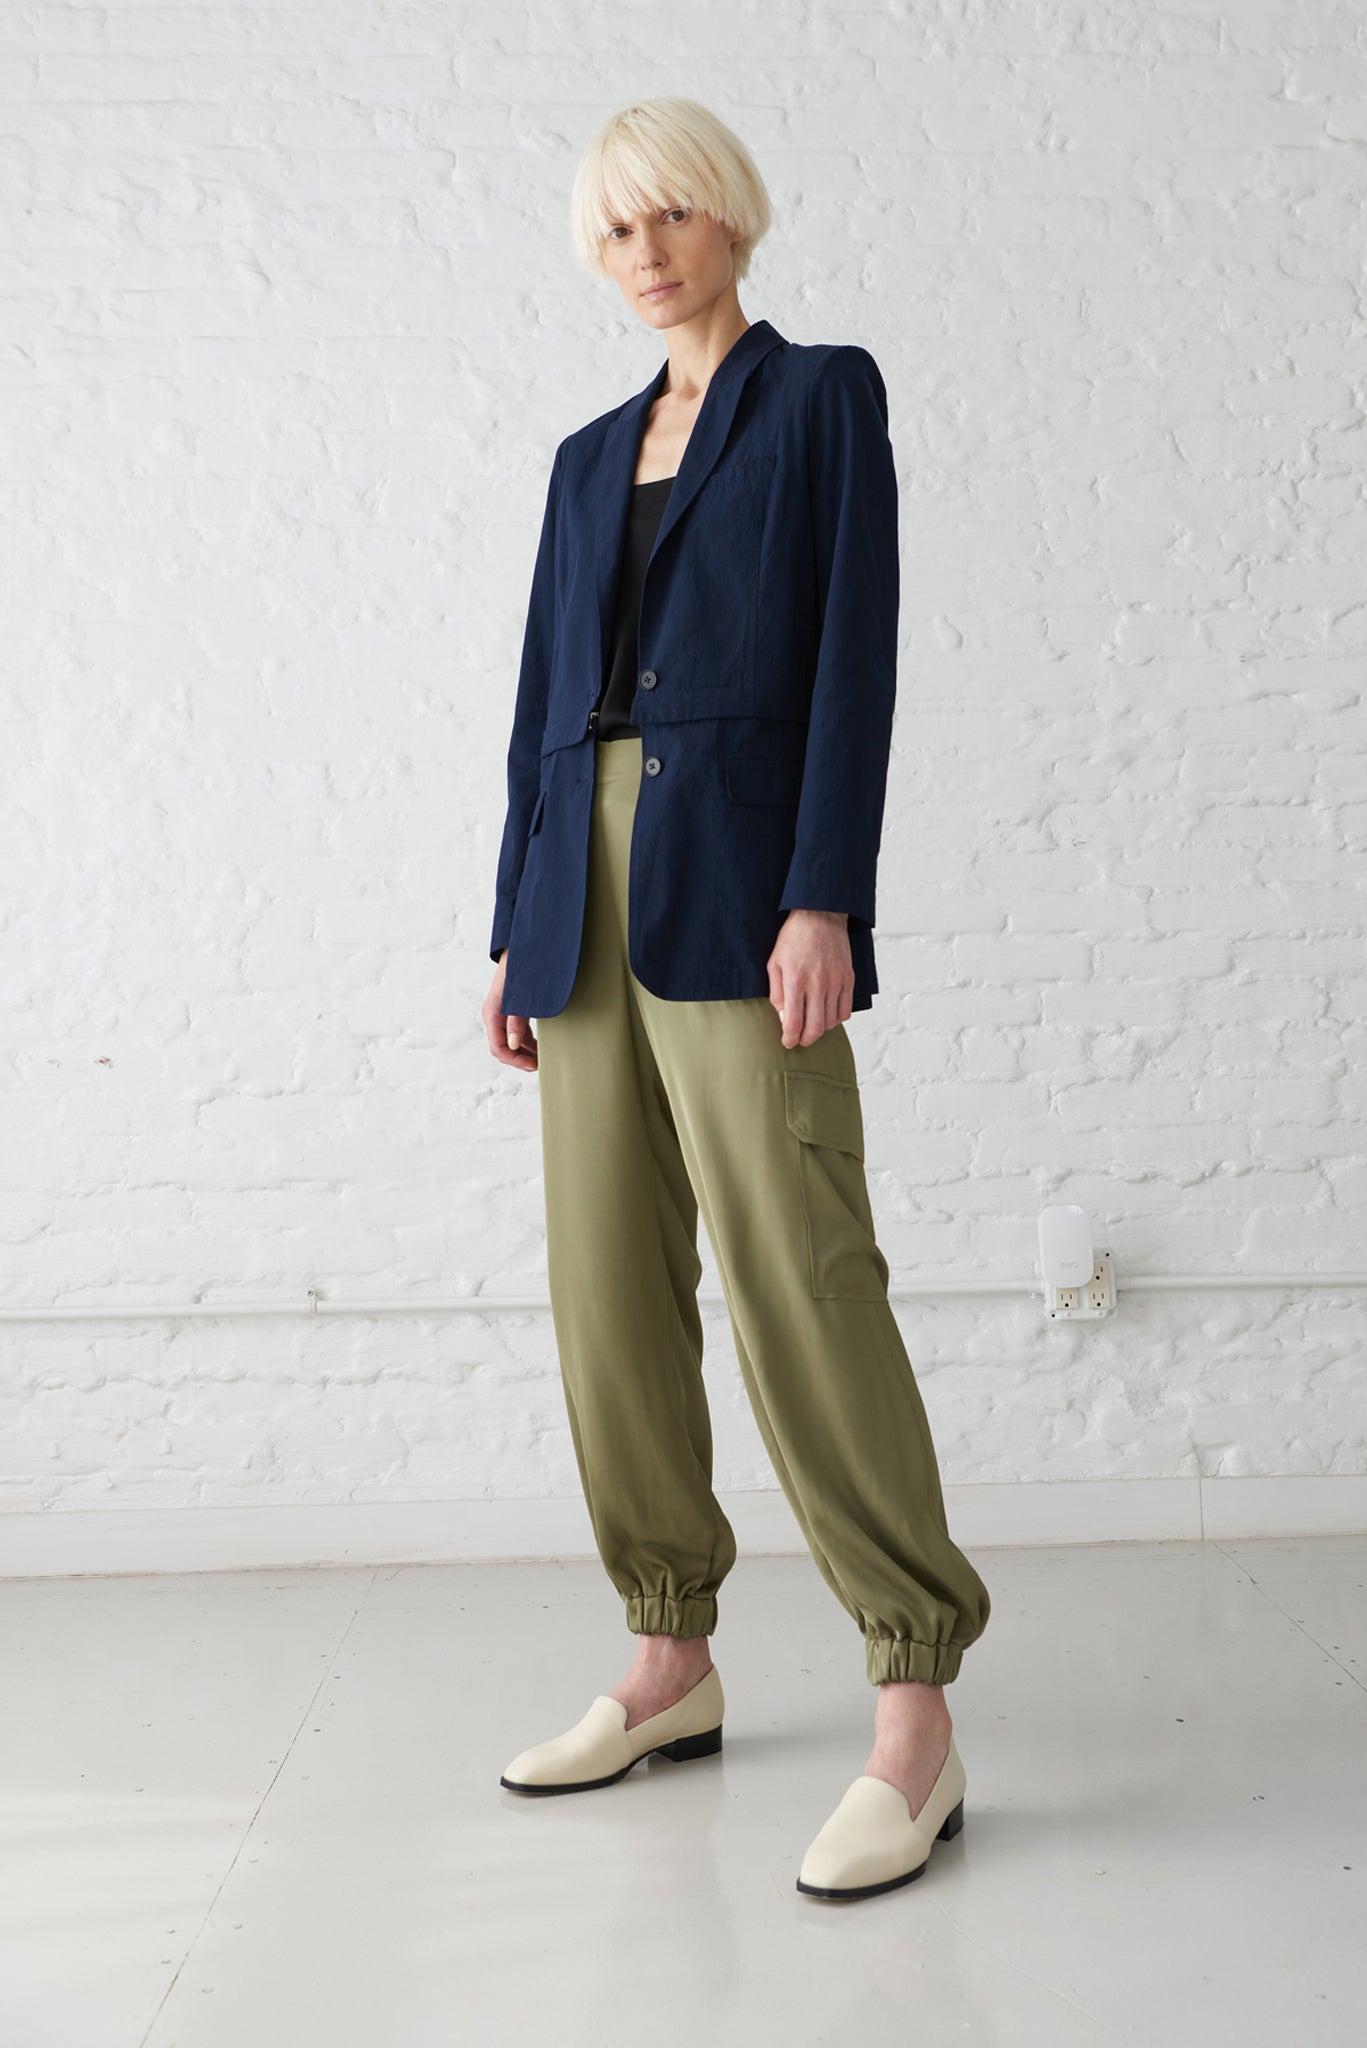 woman wearing 2-in-1 convertible blazer jacket made from GOTS organic cotton in navy blue